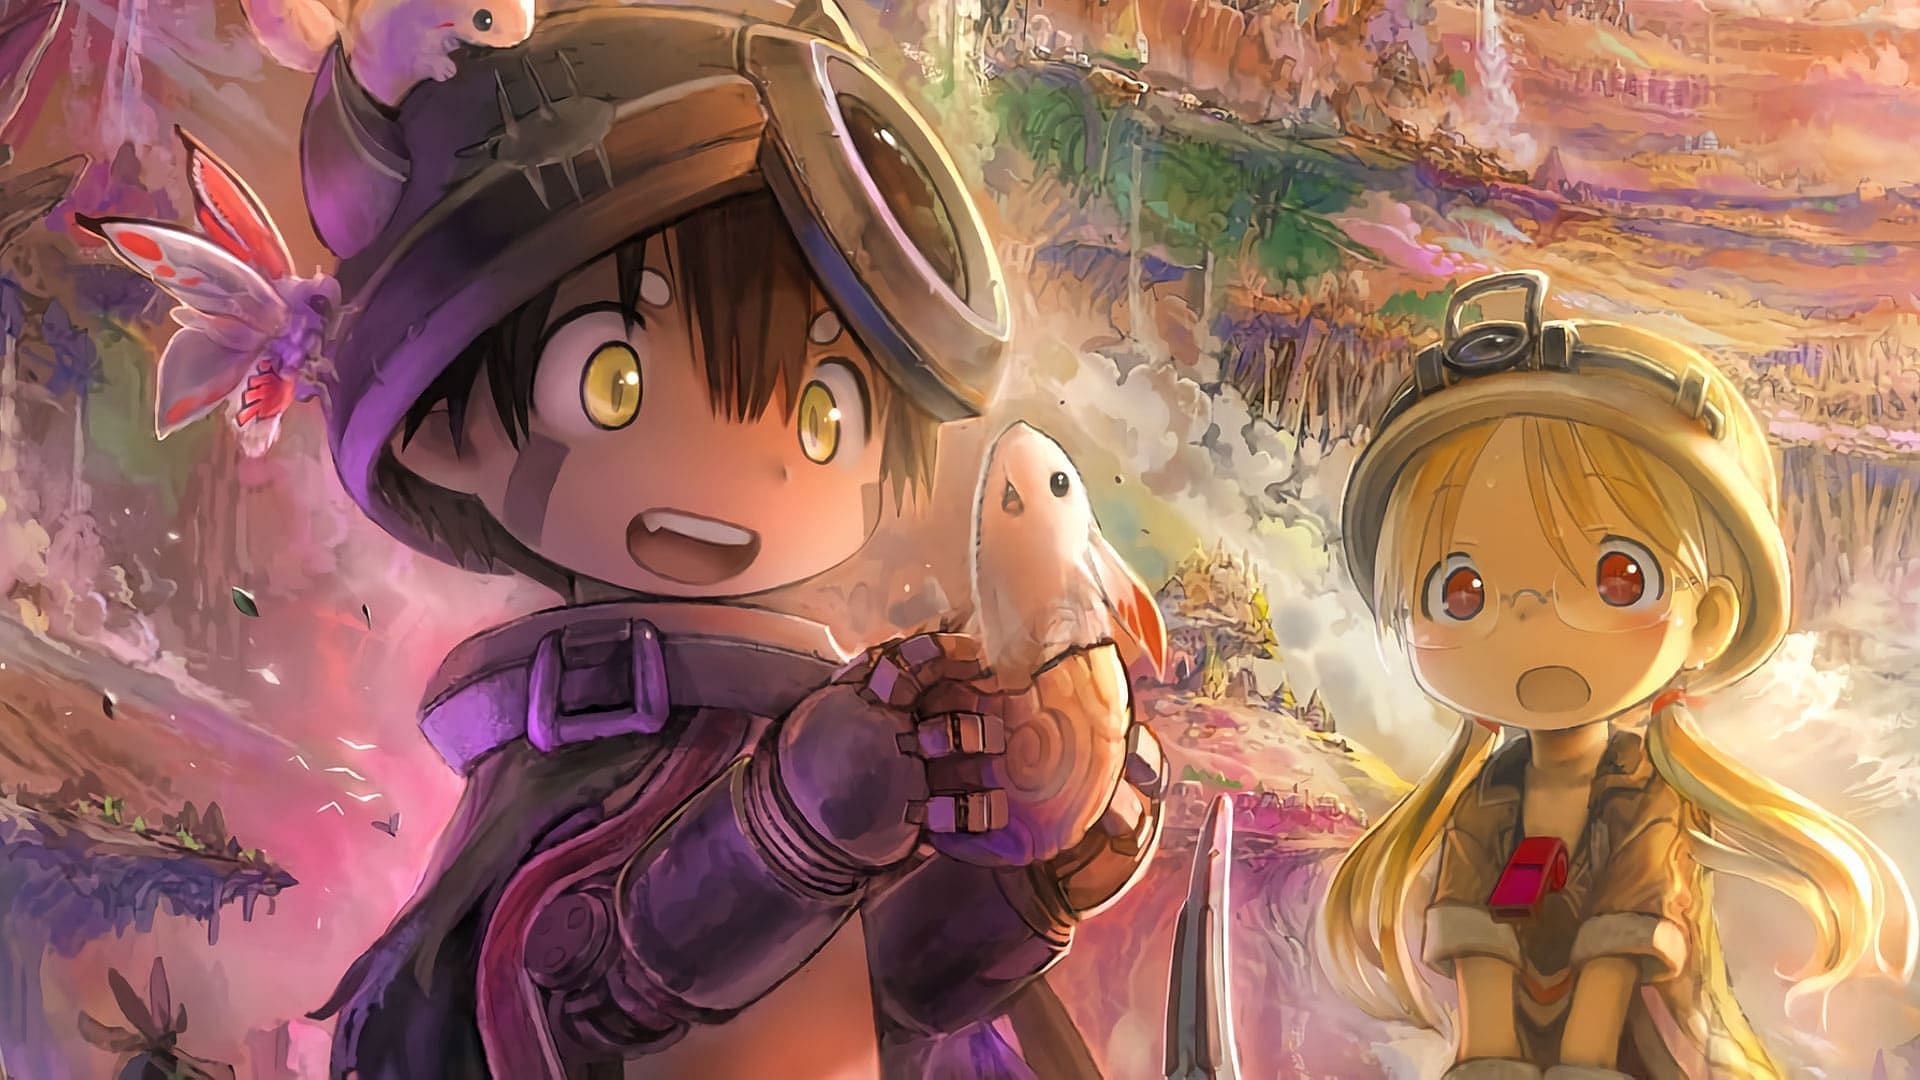 Made in Abyss Reveals New Season 2 Trailer and Cast Members!, Anime News